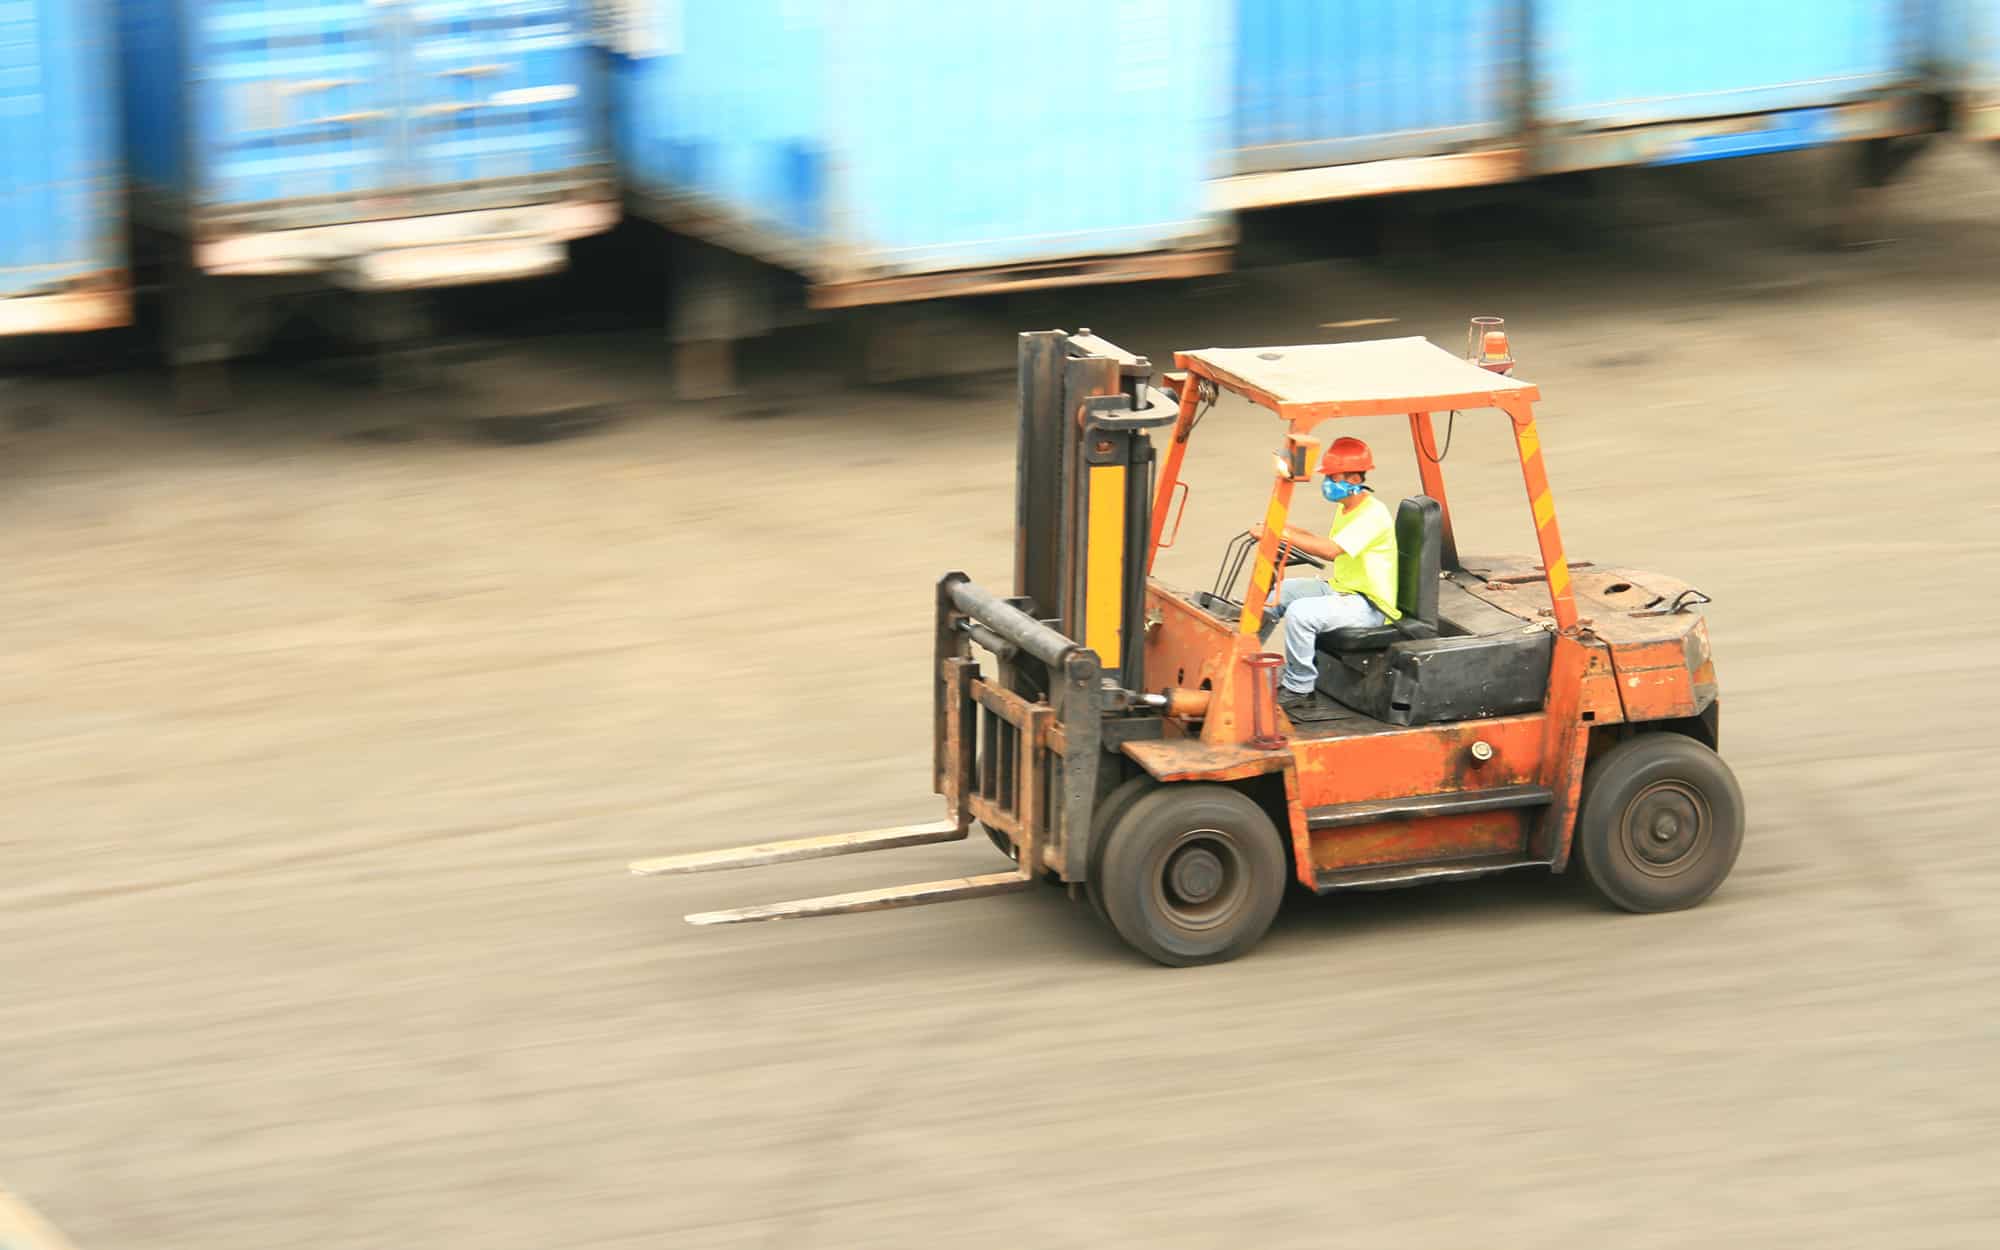 Image of two workers inspecting a forklift.